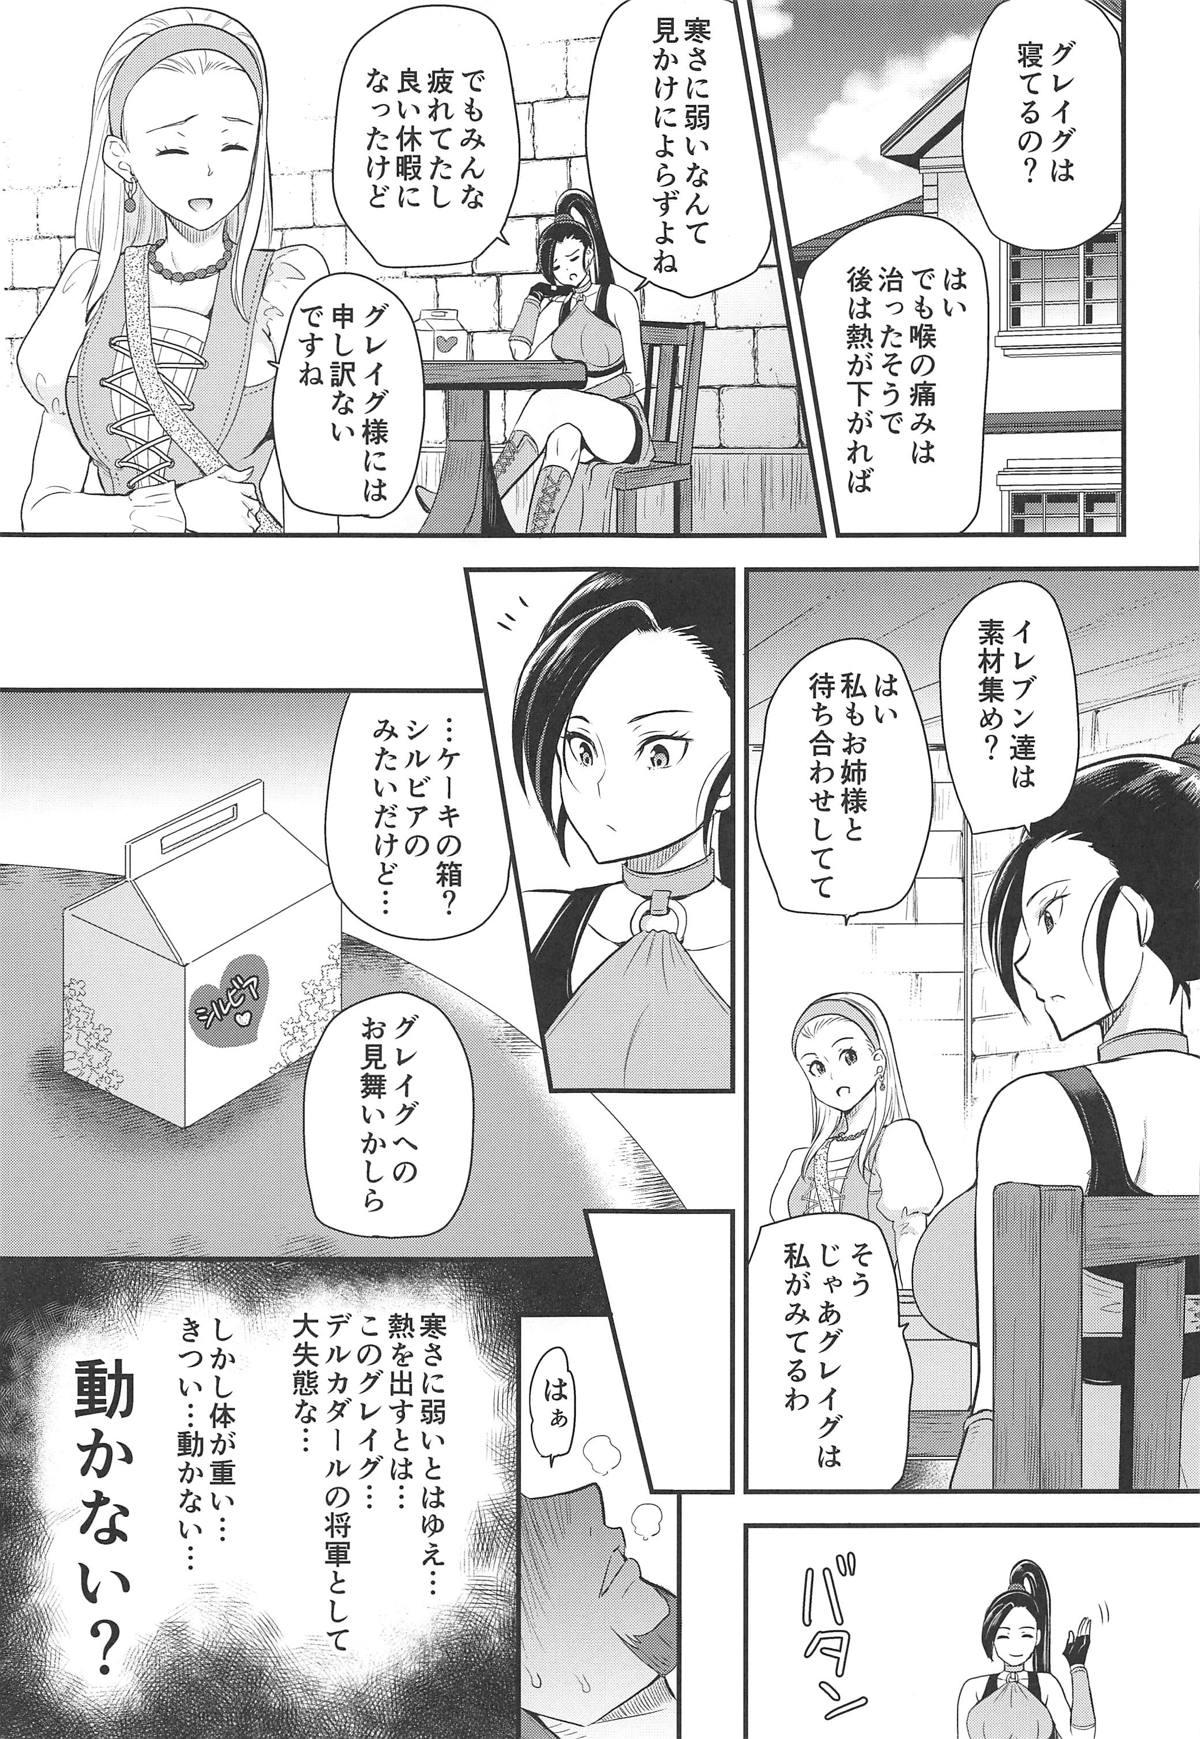 Stripping Cherry Fight + Momoiro Omakebon - Dragon quest xi Beach - Page 3